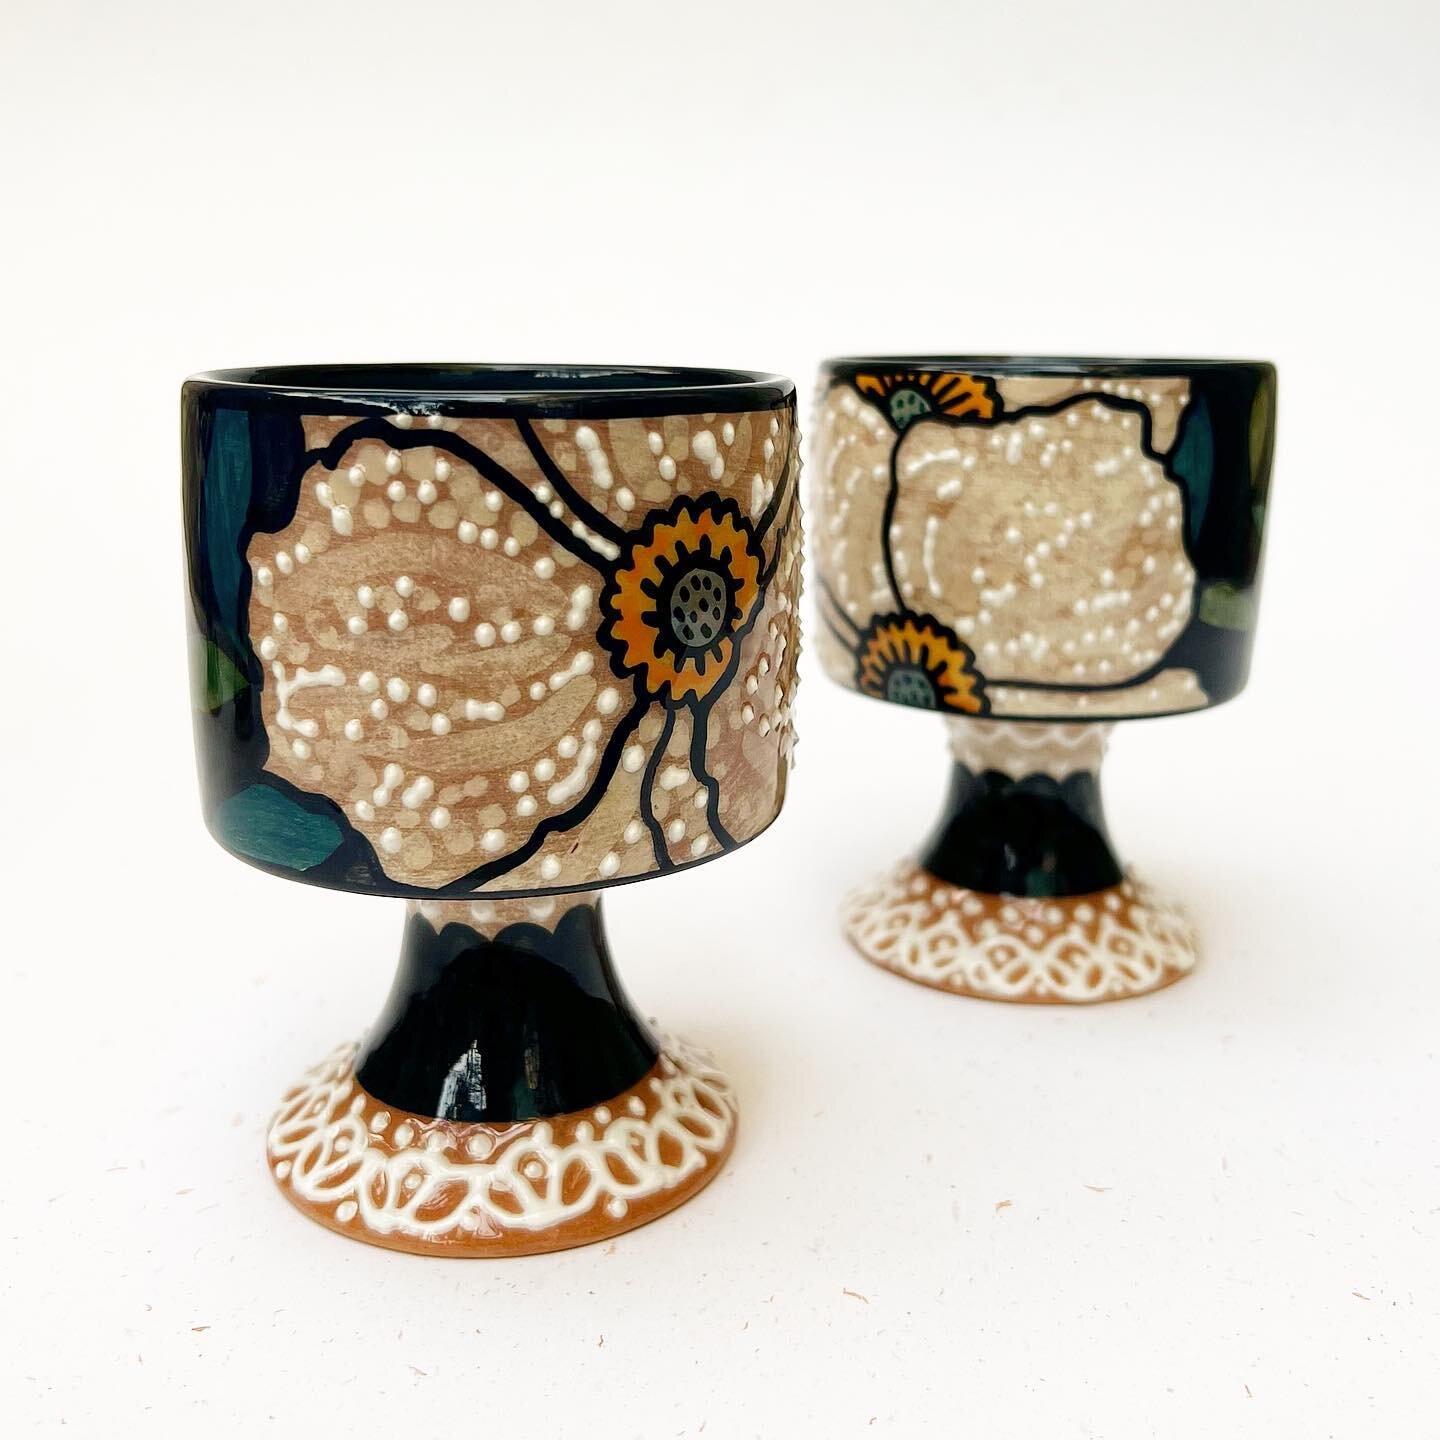 The Matilija Poppy, &ldquo;appears to thrive on neglect&rdquo;.

It probably just doesn&rsquo;t like people very much, which is fair!
.
.
.
#loveonabike #pottery #ceramics #earthenware #terracotta #winegoblet #poppy #floral #colorobbia #underglaze #c